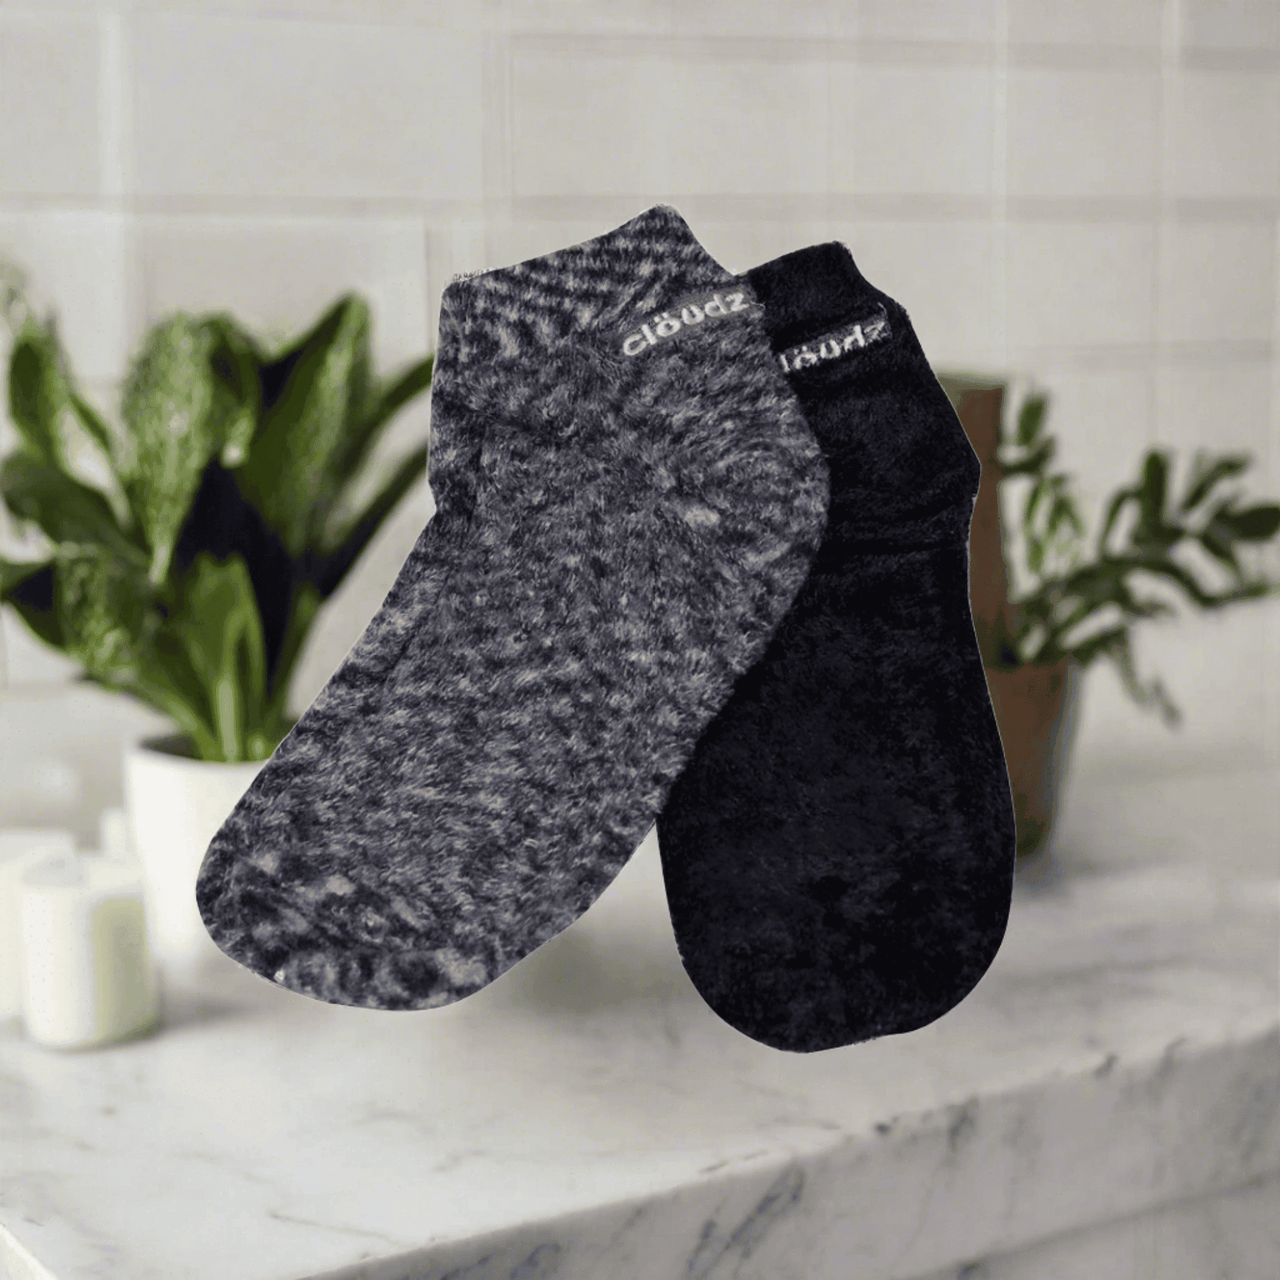 Cozy Foot Pamper Gift Set - Soft, comfortable socks for relaxed feet, presented in an elegant lifestyle setting.